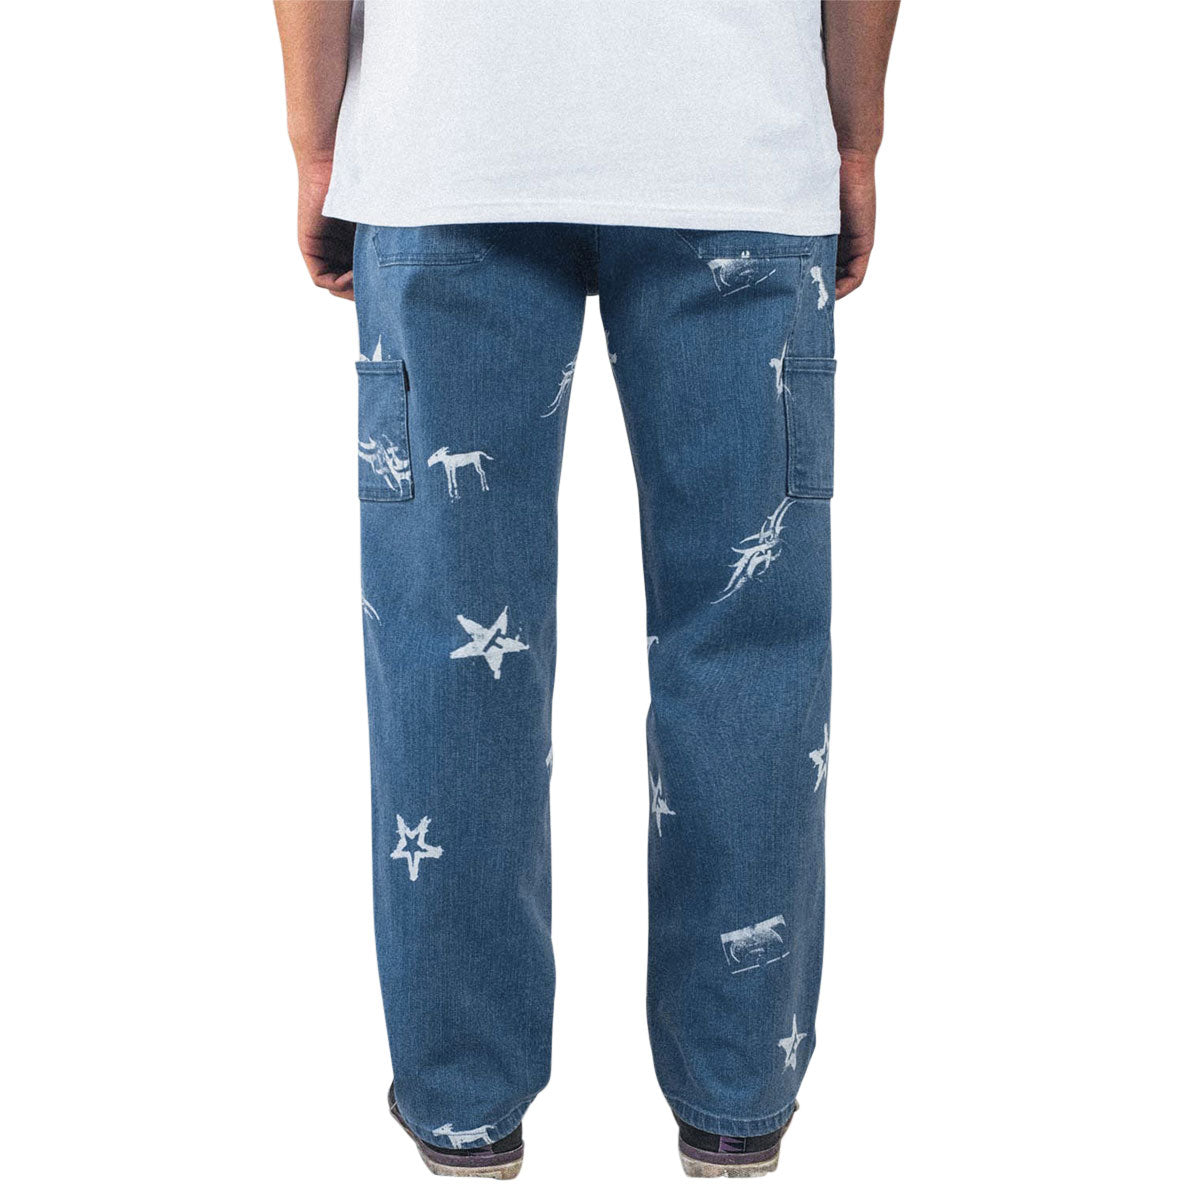 Former Distend Wishing Jeans - Worn Blue image 3